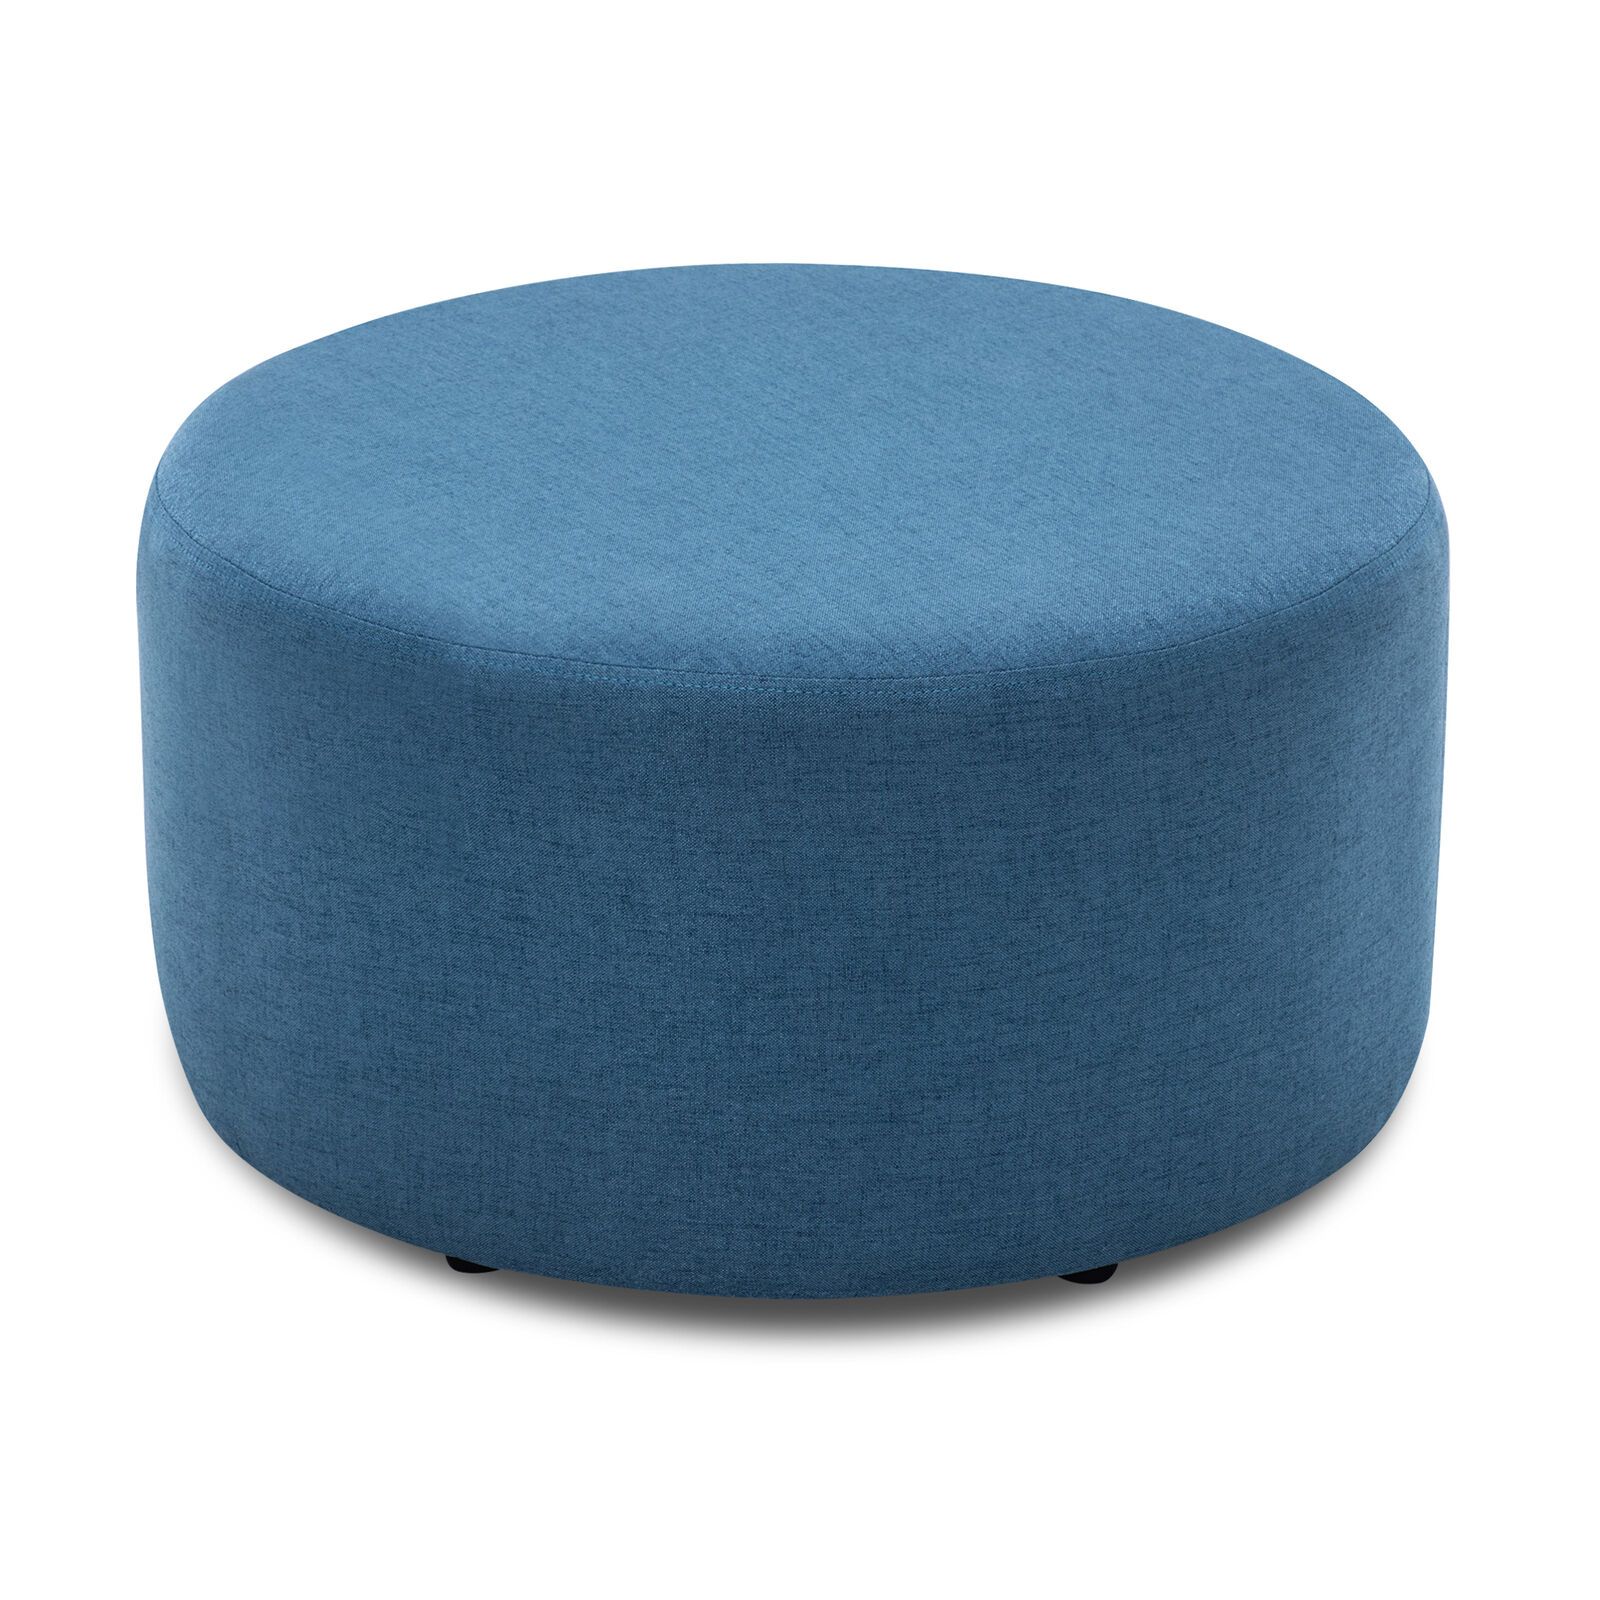 24" Round Upholstered Kiln Dried Hardwood Blue Ottoman – Affordable For Pouf Textured Blue Round Pouf Ottomans (View 7 of 20)